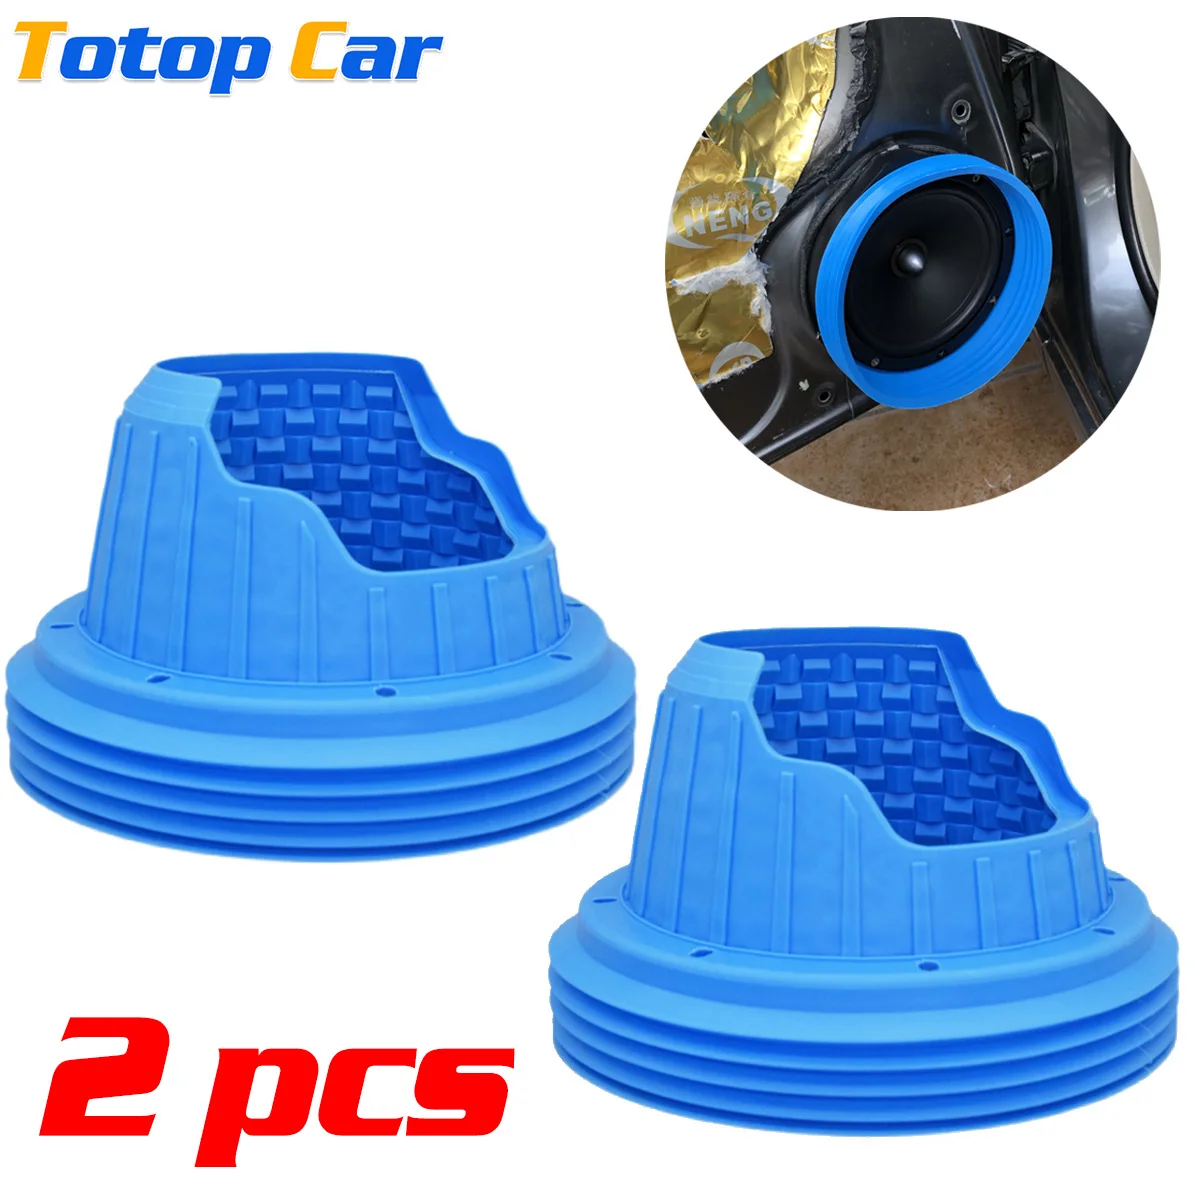 2pcs Car Audio 6.5 Inch Speaker Waterguards Cover Sound Insulation Stop Shock Silica Gel Seal Mount Adapter Universal